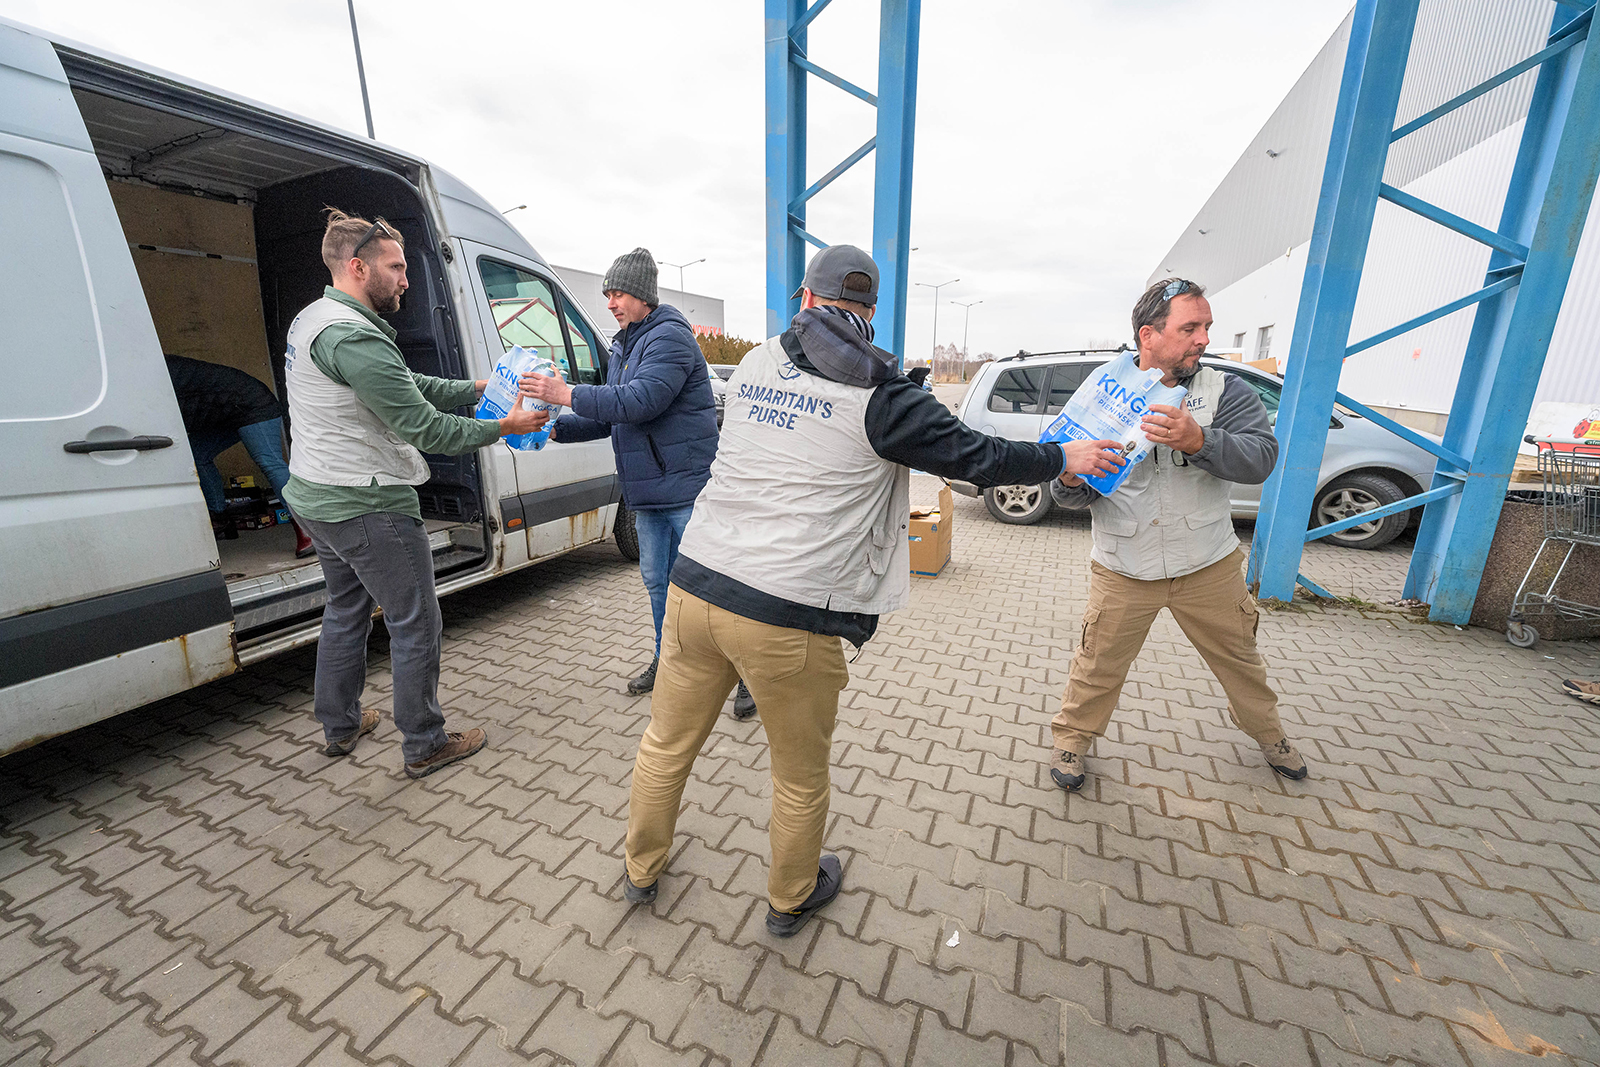 Samaritan's Purse Disaster Assistance Response Team members supply food and water at a refugee center in Poland, March 2, 2022. Photo courtesy of Samaritan's Purse